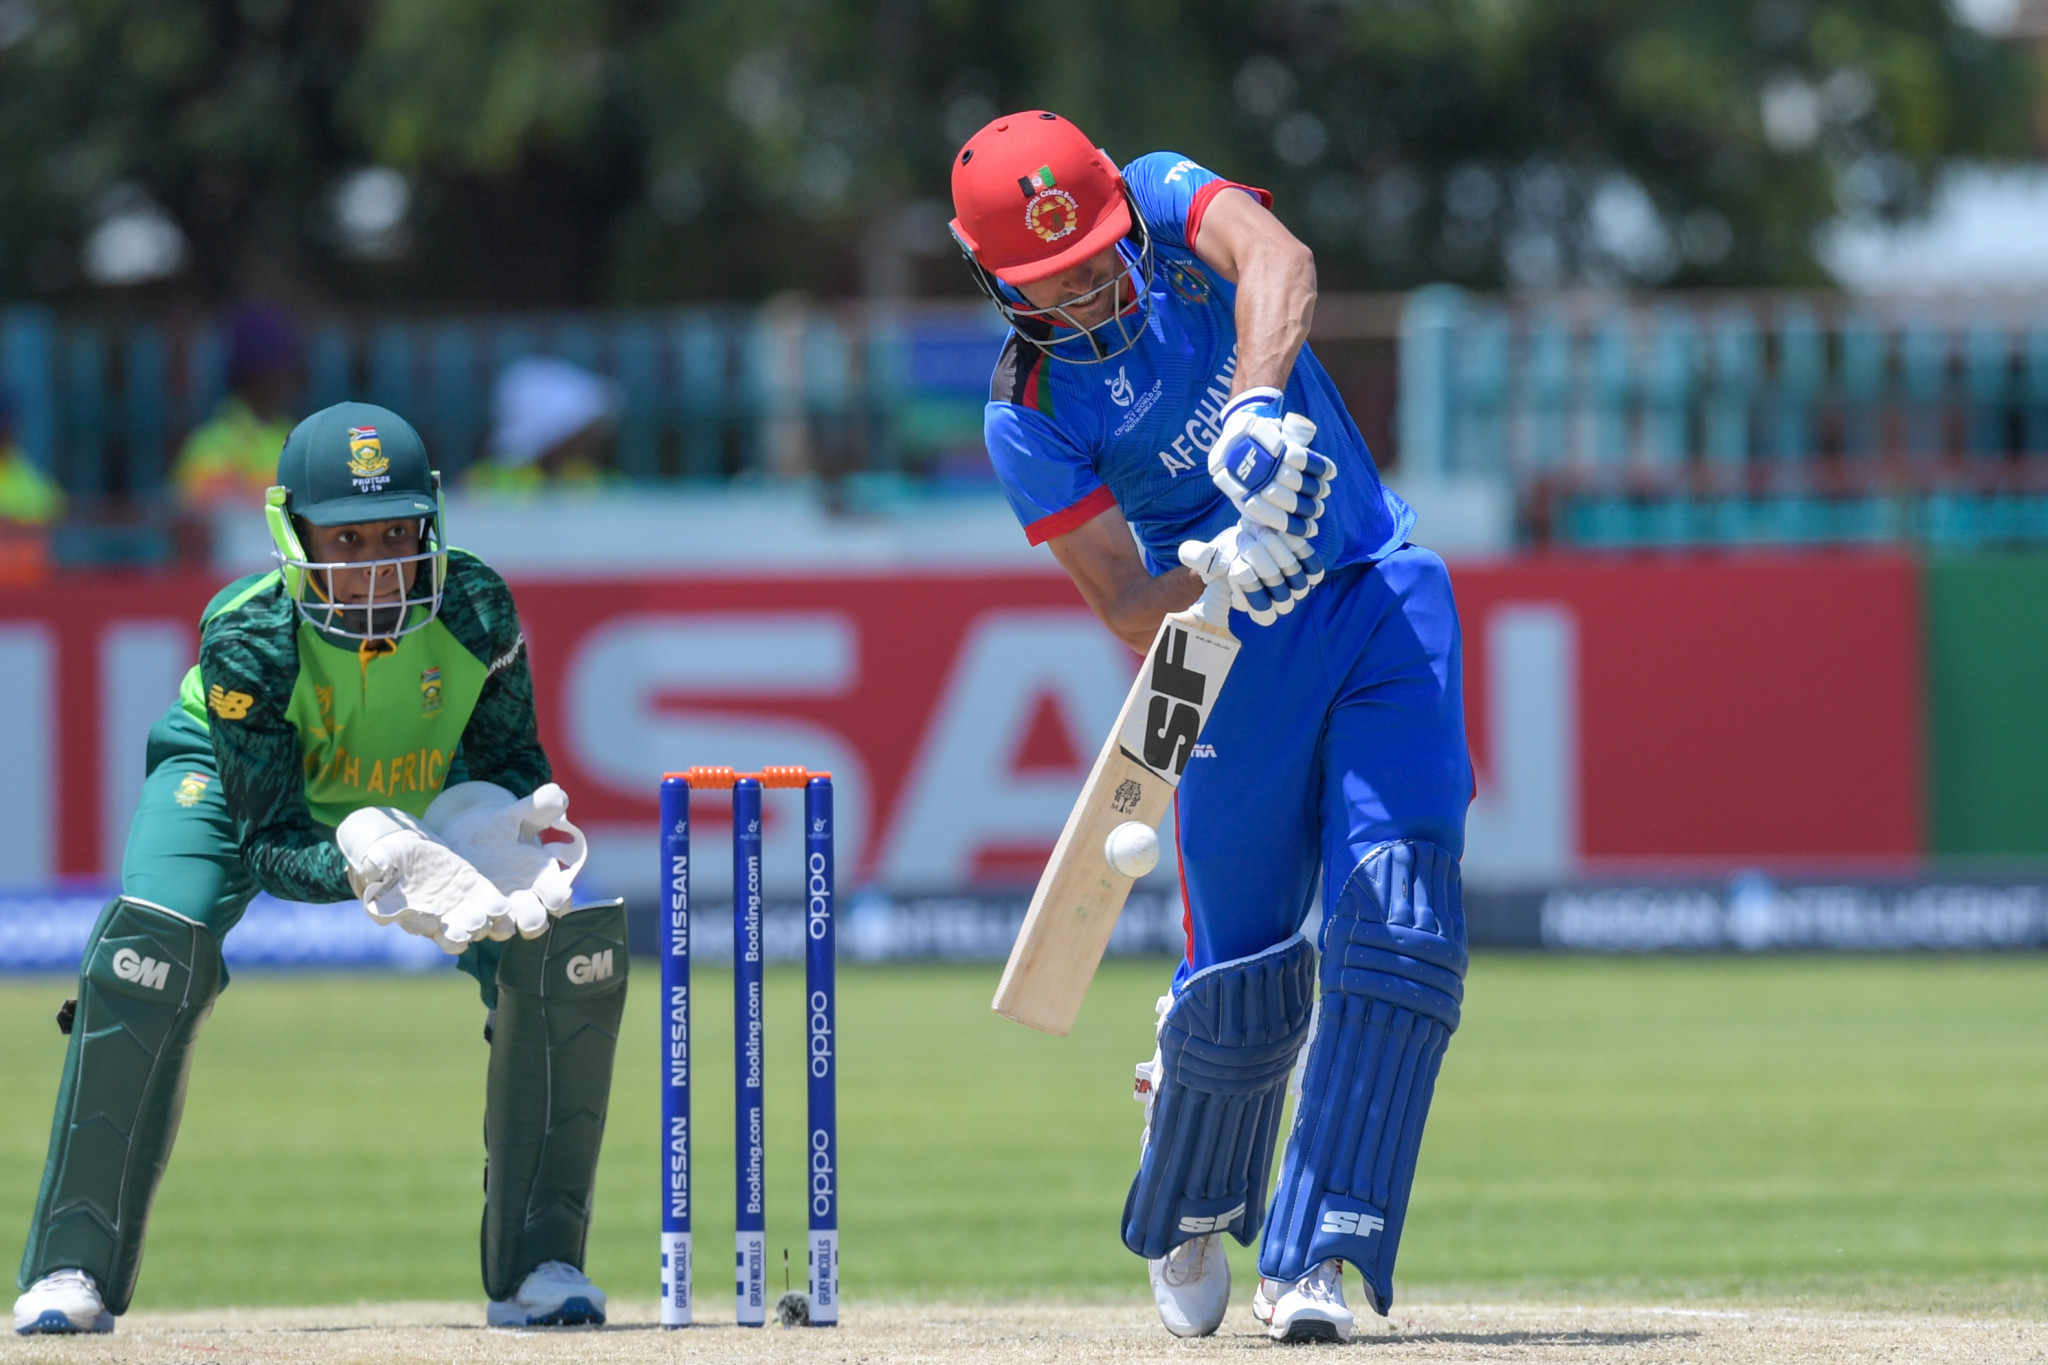 Ibrahim Zadran scored 73 as Afghanistan beat the hosts South Africa to seventh place today at the ICC Under-19 World Cup ©Getty Images